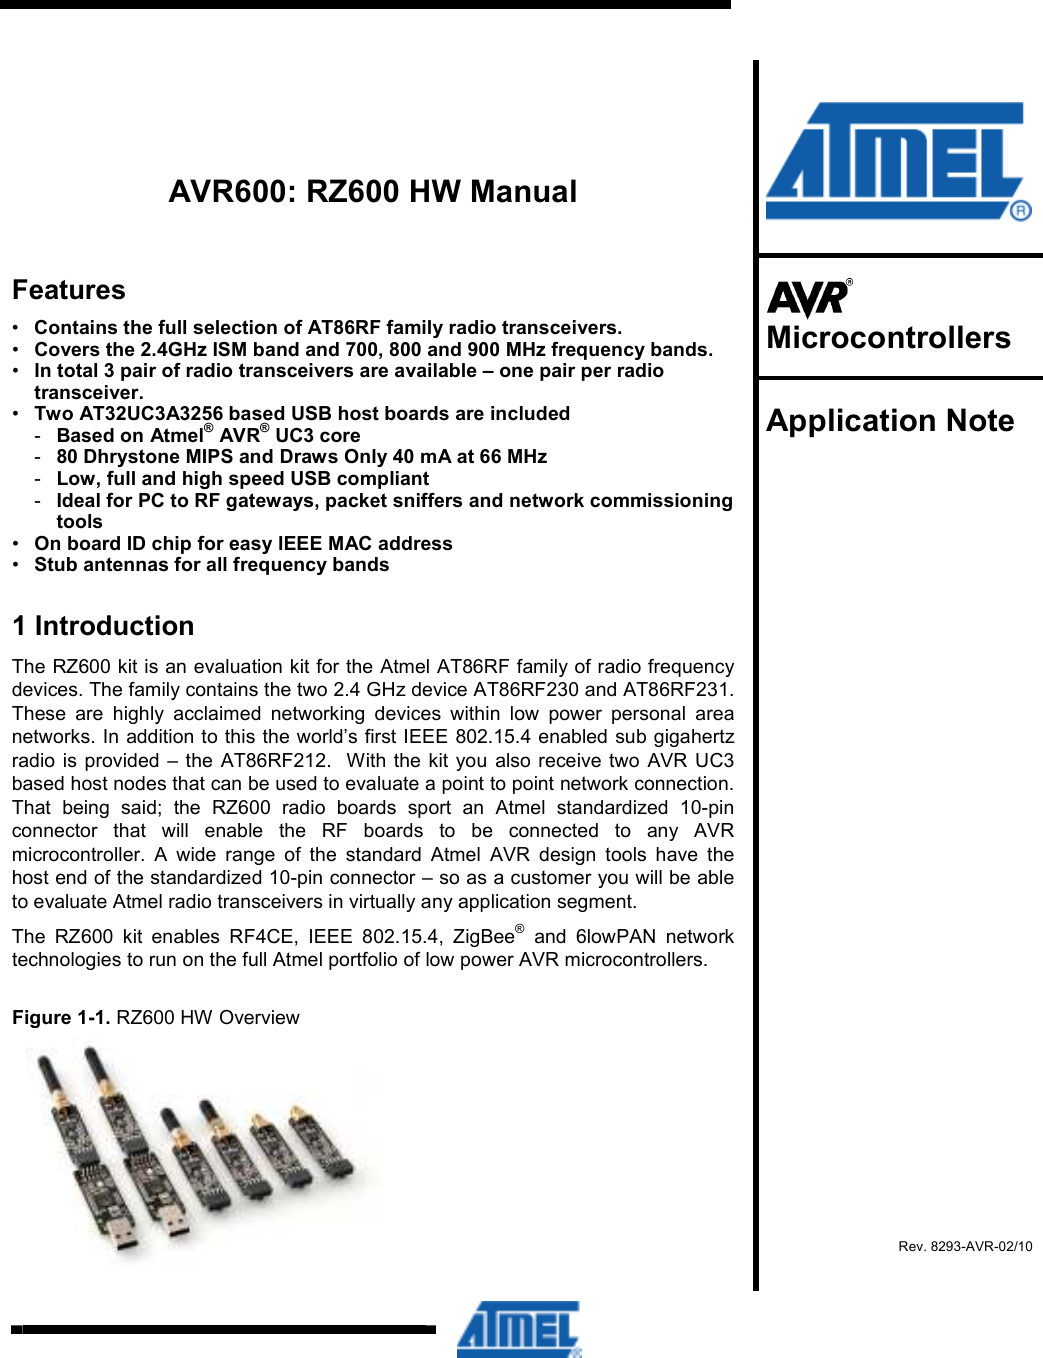          AVR600: RZ600 HW Manual Features •  Contains the full selection of AT86RF family radio transceivers. •  Covers the 2.4GHz ISM band and 700, 800 and 900 MHz frequency bands. •  In total 3 pair of radio transceivers are available – one pair per radio transceiver. •  Two AT32UC3A3256 based USB host boards are included -  Based on Atmel® AVR® UC3 core -  80 Dhrystone MIPS and Draws Only 40 mA at 66 MHz -  Low, full and high speed USB compliant -  Ideal for PC to RF gateways, packet sniffers and network commissioning tools •  On board ID chip for easy IEEE MAC address •  Stub antennas for all frequency bands 1 Introduction The RZ600 kit is an evaluation kit for the Atmel AT86RF family of radio frequency devices. The family contains the two 2.4 GHz device AT86RF230 and AT86RF231. These  are  highly  acclaimed  networking  devices  within  low  power  personal  area networks. In addition to this the world’s first IEEE 802.15.4 enabled sub gigahertz radio  is  provided  – the AT86RF212.  With the  kit you also receive two  AVR  UC3 based host nodes that can be used to evaluate a point to point network connection. That  being  said;  the  RZ600  radio  boards  sport  an  Atmel  standardized  10-pin connector  that  will  enable  the  RF  boards  to  be  connected  to  any  AVR microcontroller.  A  wide  range  of  the  standard  Atmel  AVR  design  tools  have  the host end of the standardized 10-pin connector – so as a customer you will be able to evaluate Atmel radio transceivers in virtually any application segment. The  RZ600  kit  enables  RF4CE,  IEEE  802.15.4,  ZigBee®  and  6lowPAN  network technologies to run on the full Atmel portfolio of low power AVR microcontrollers. Figure 1-1. RZ600 HW Overview     Microcontrollers  Application Note    Rev. 8293-AVR-02/10  